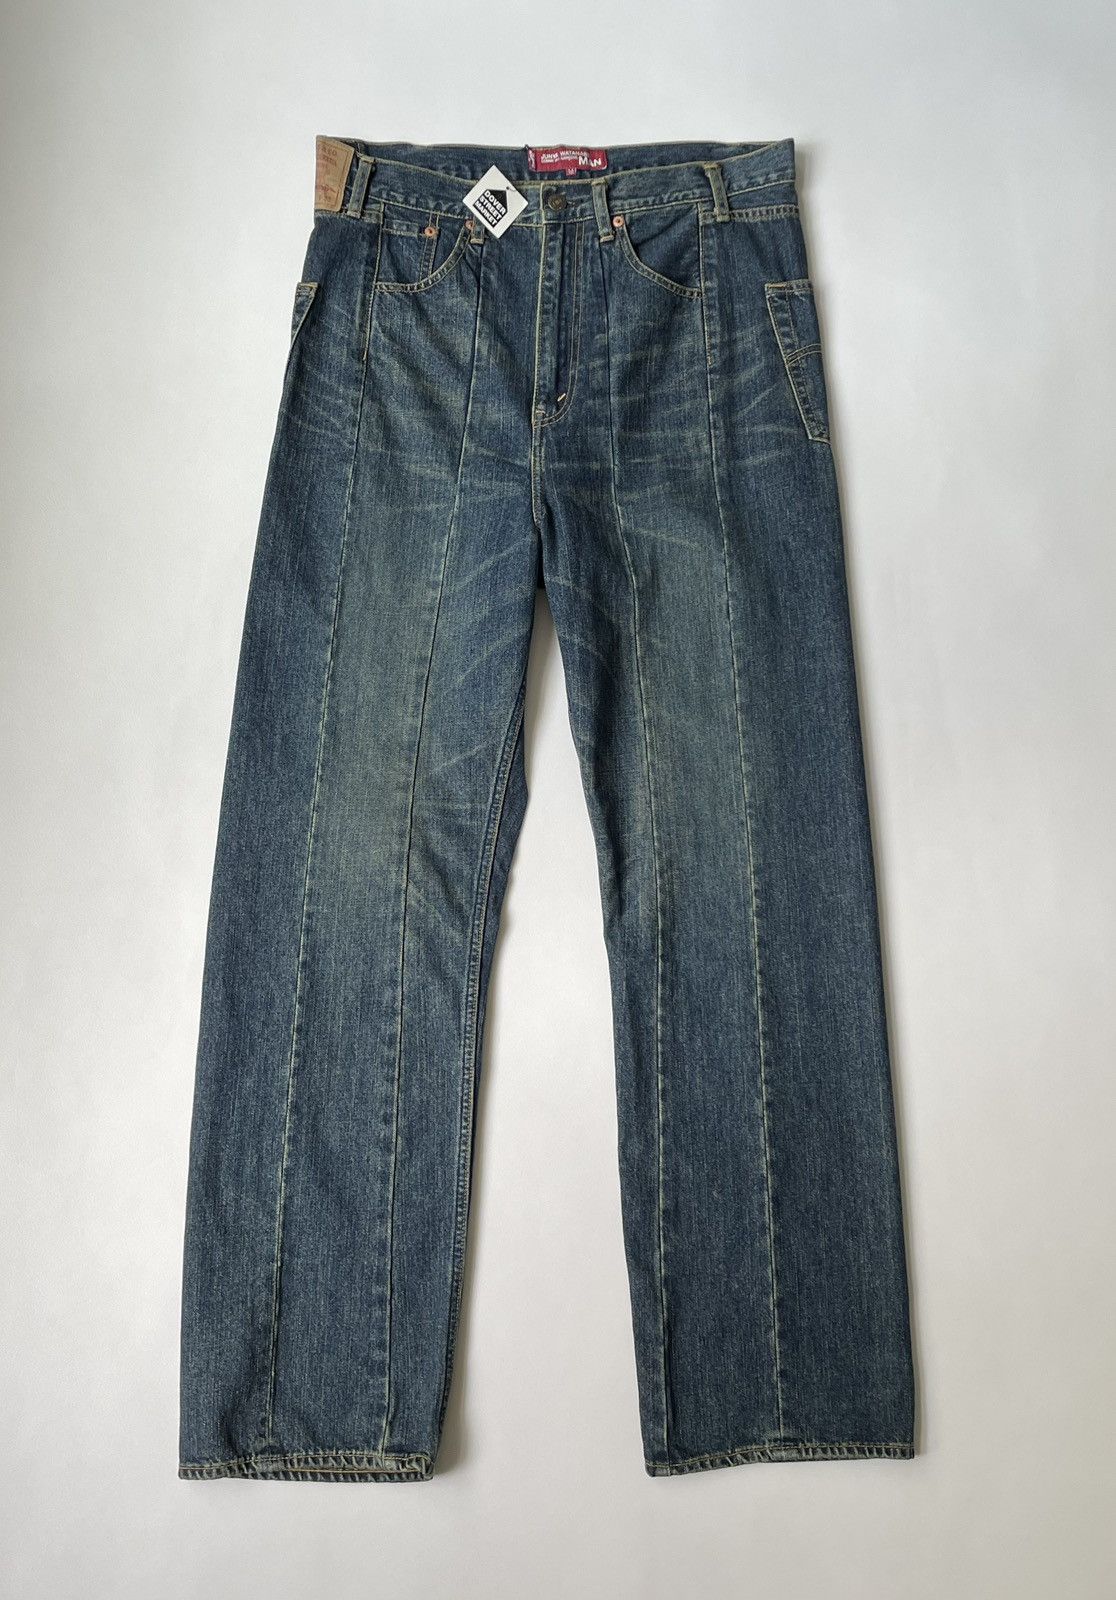 Junya Watanabe A/W 06 Reworked Washed Denim Jeans | Grailed